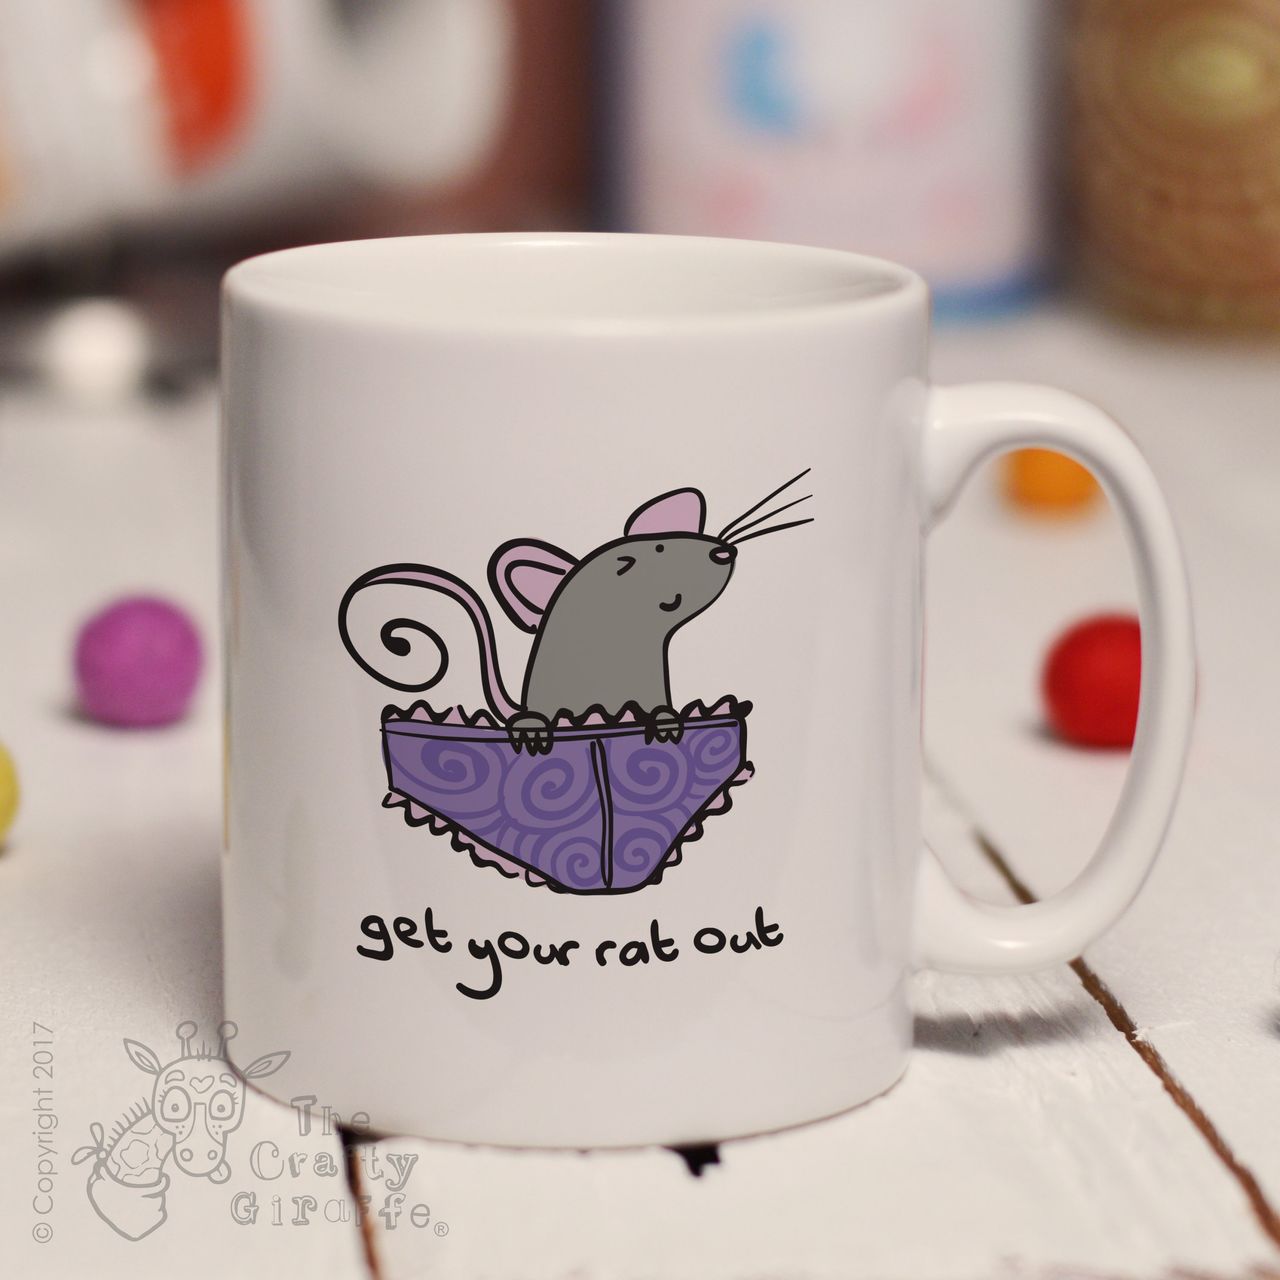 Get your rat out knickers mug